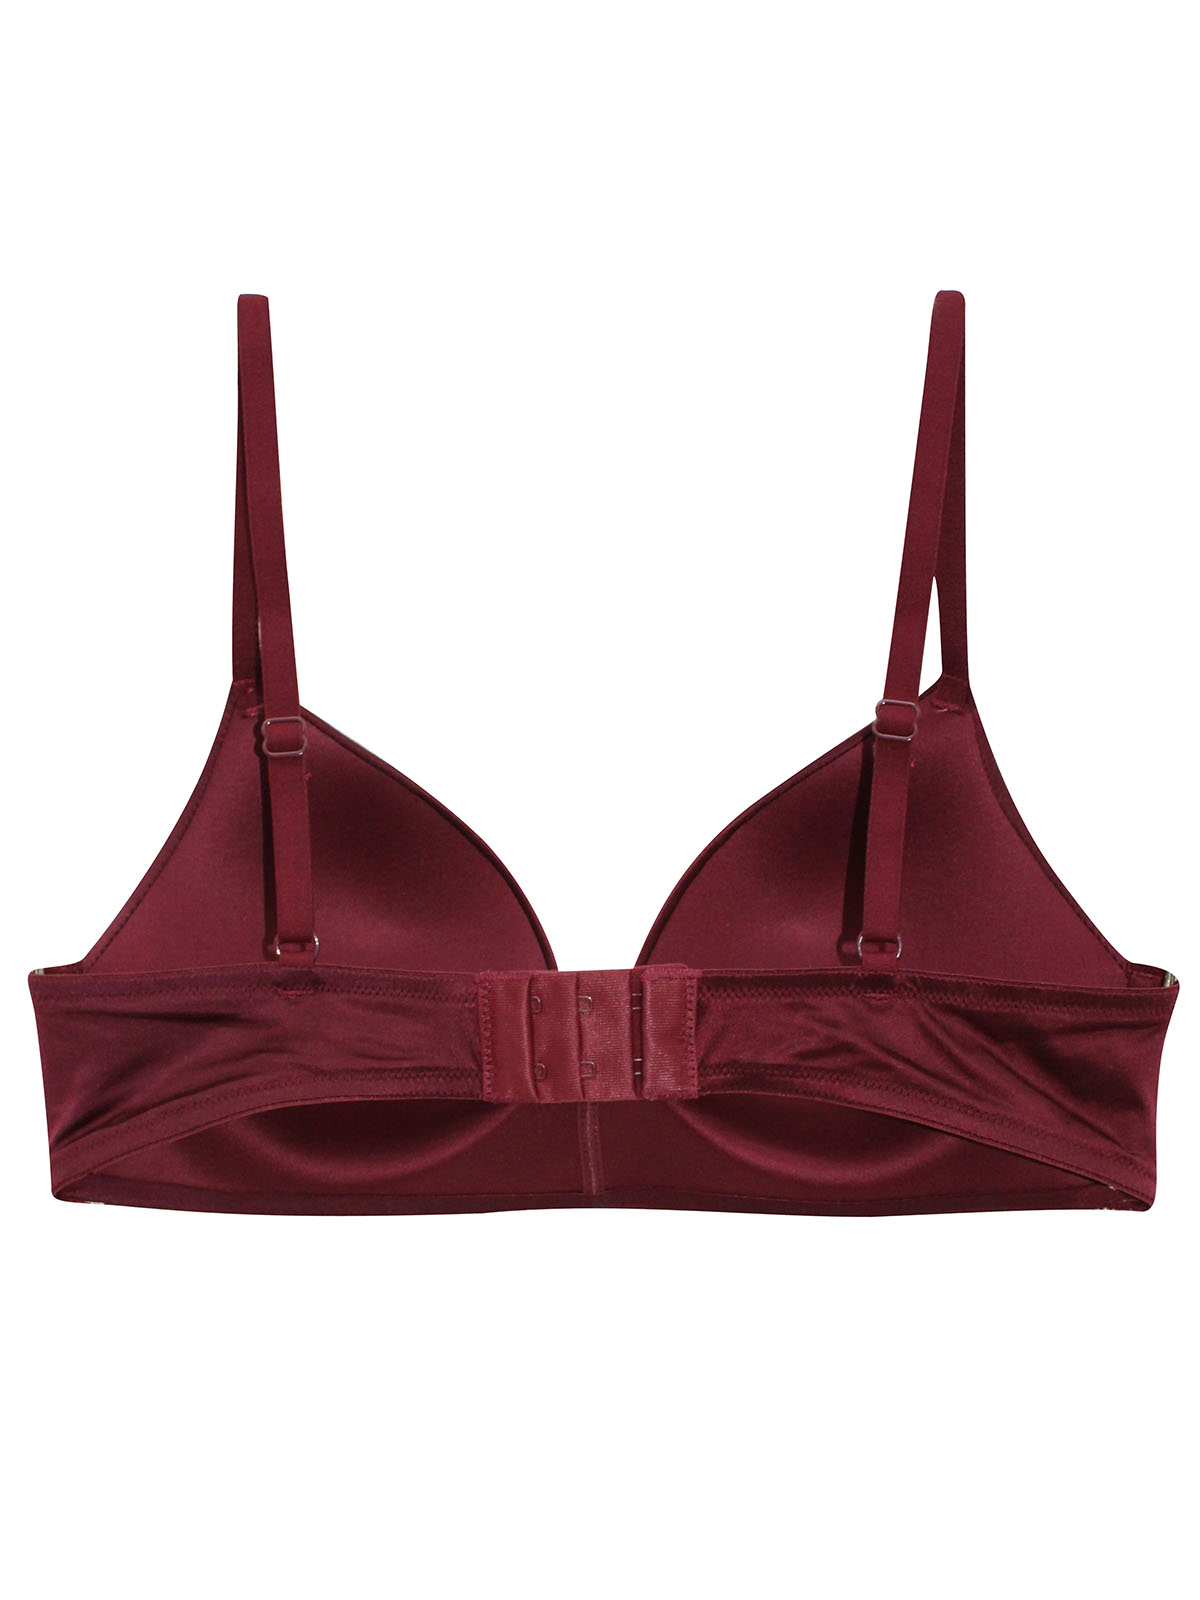 La SENZA, Intimates & Sleepwear, La Senza Cherry Red Up Bra With  Convertible Straps And Lined Cups 34b